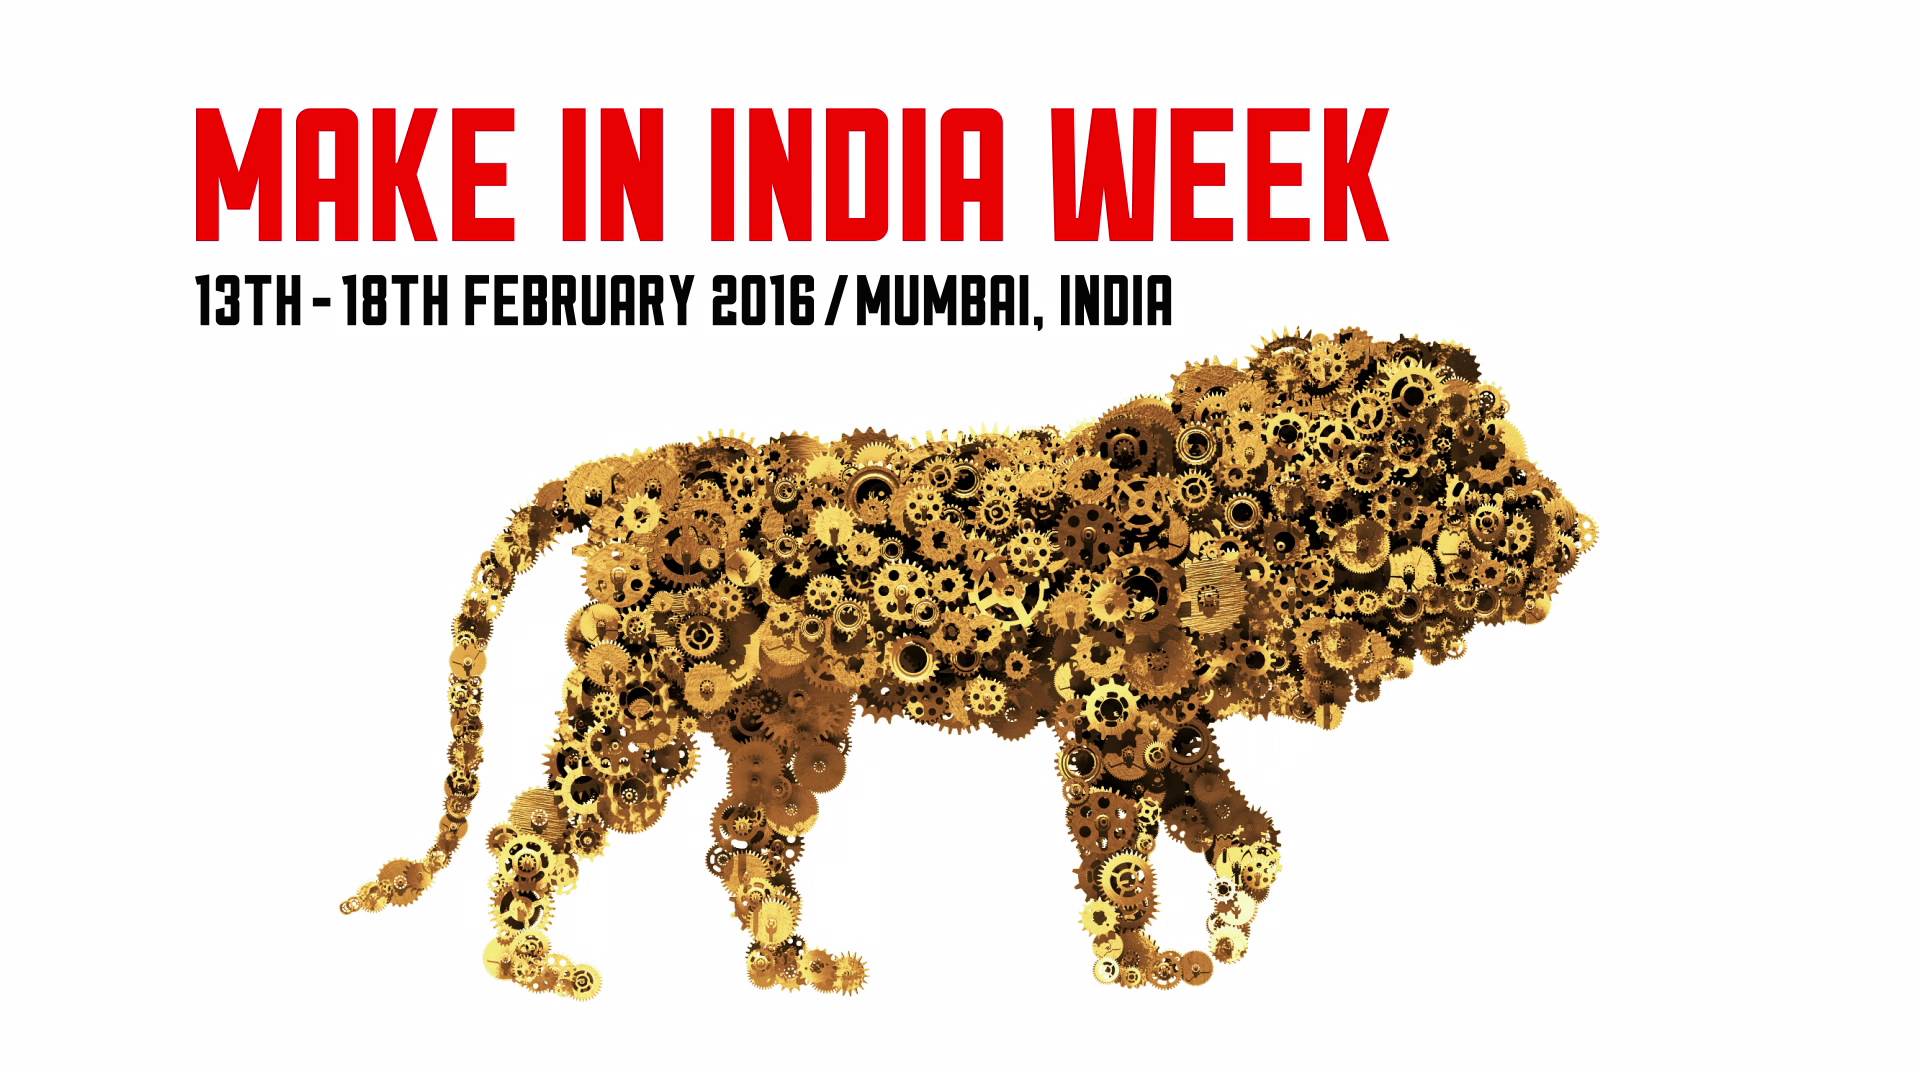 Make-In-India-Week-is-commencing-in-Mumbai